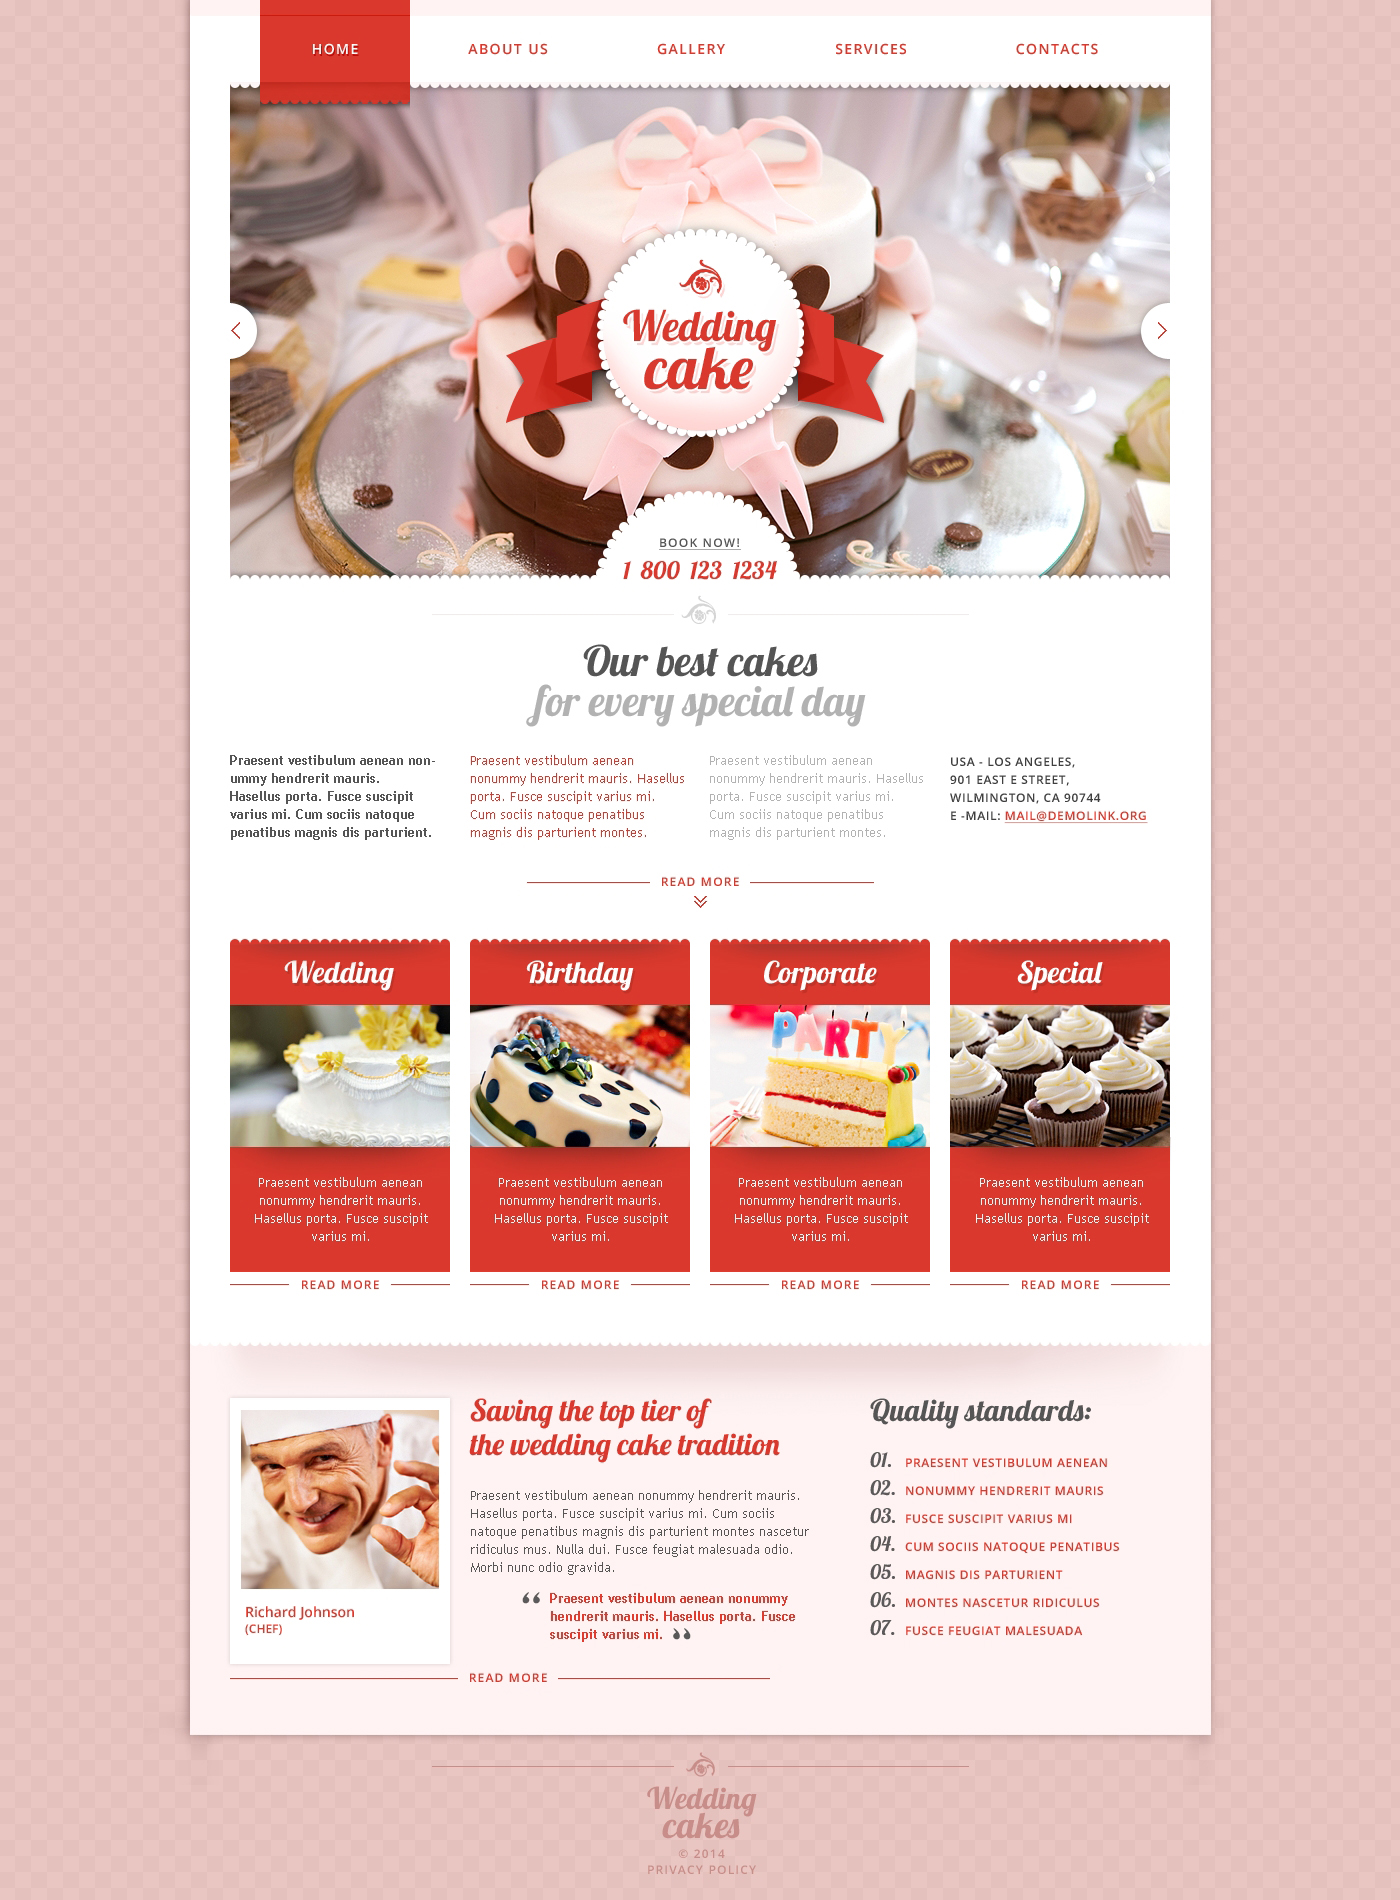 Delicacies Hotels and Restaurants Website Template » W3Layouts